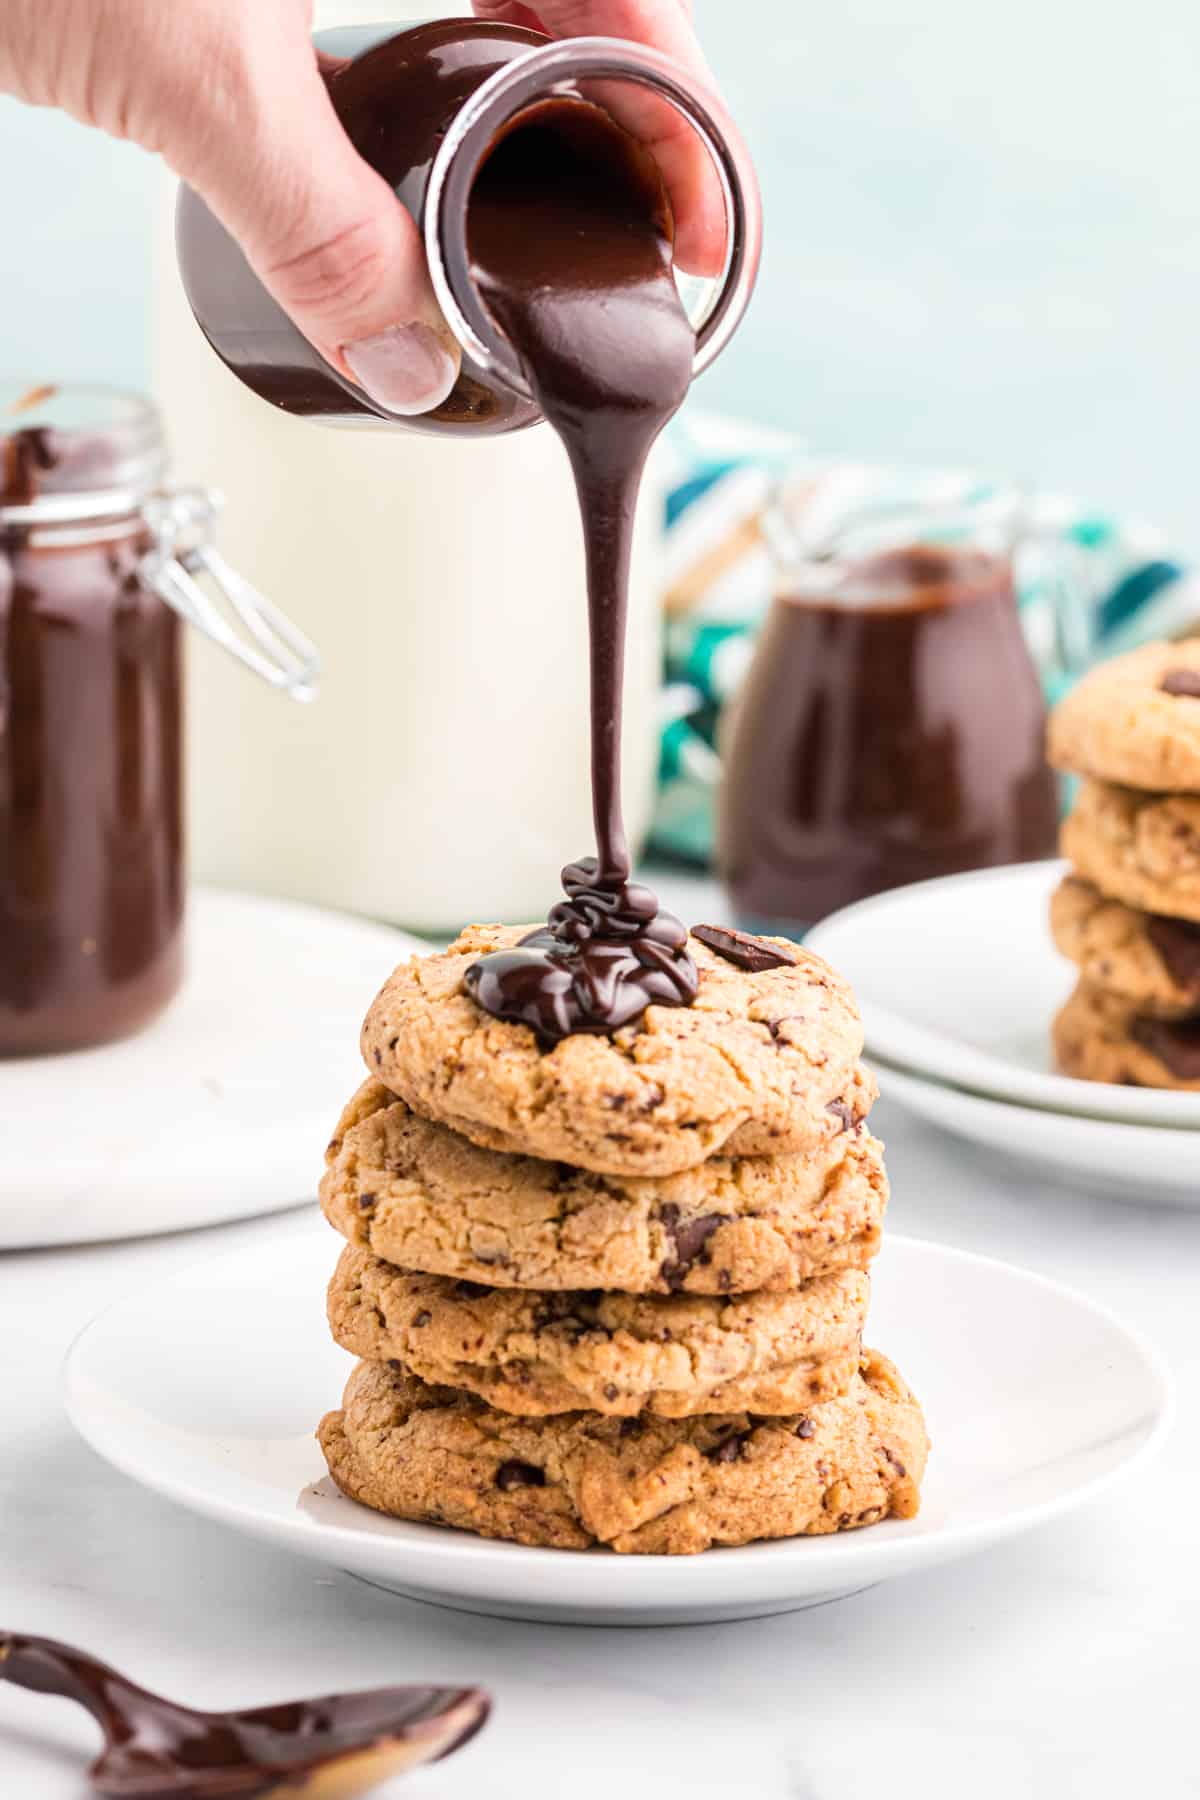 How fudge sauce is being poured onto a stack of cookies. 